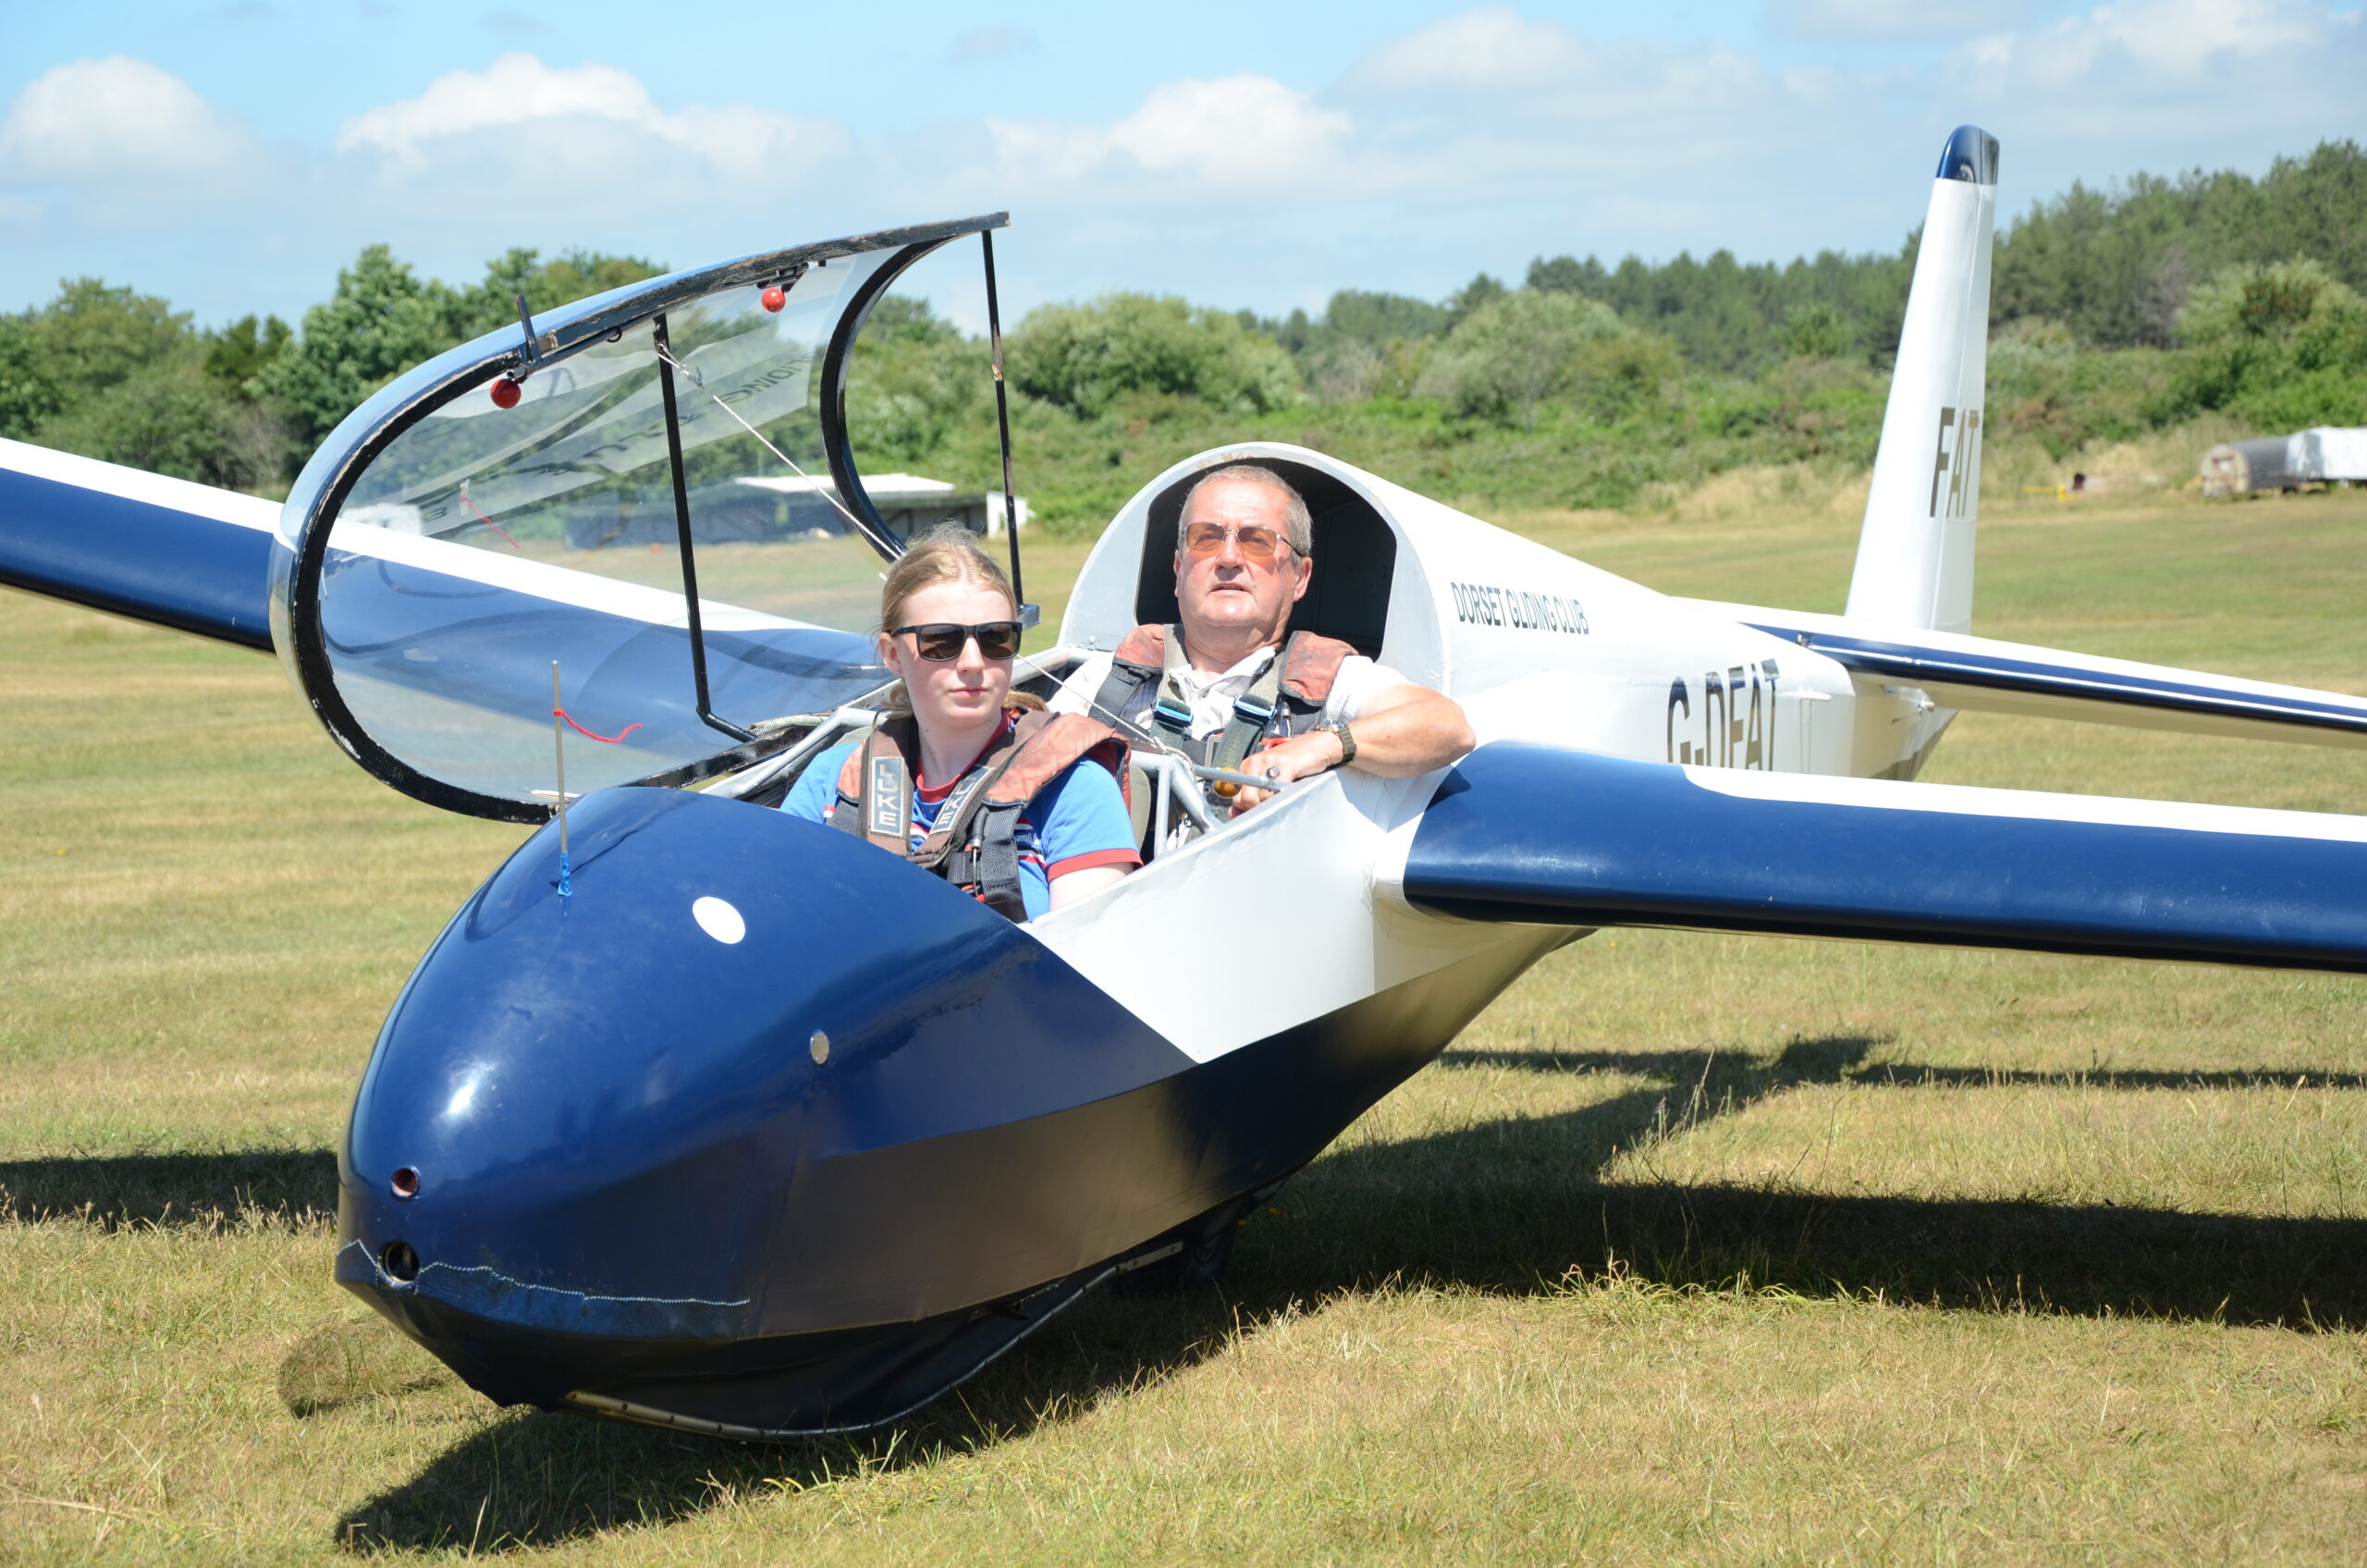 Millicent Curtis takes a turn at the helm. Pictures: Martin Best/Dorset Gliding Club